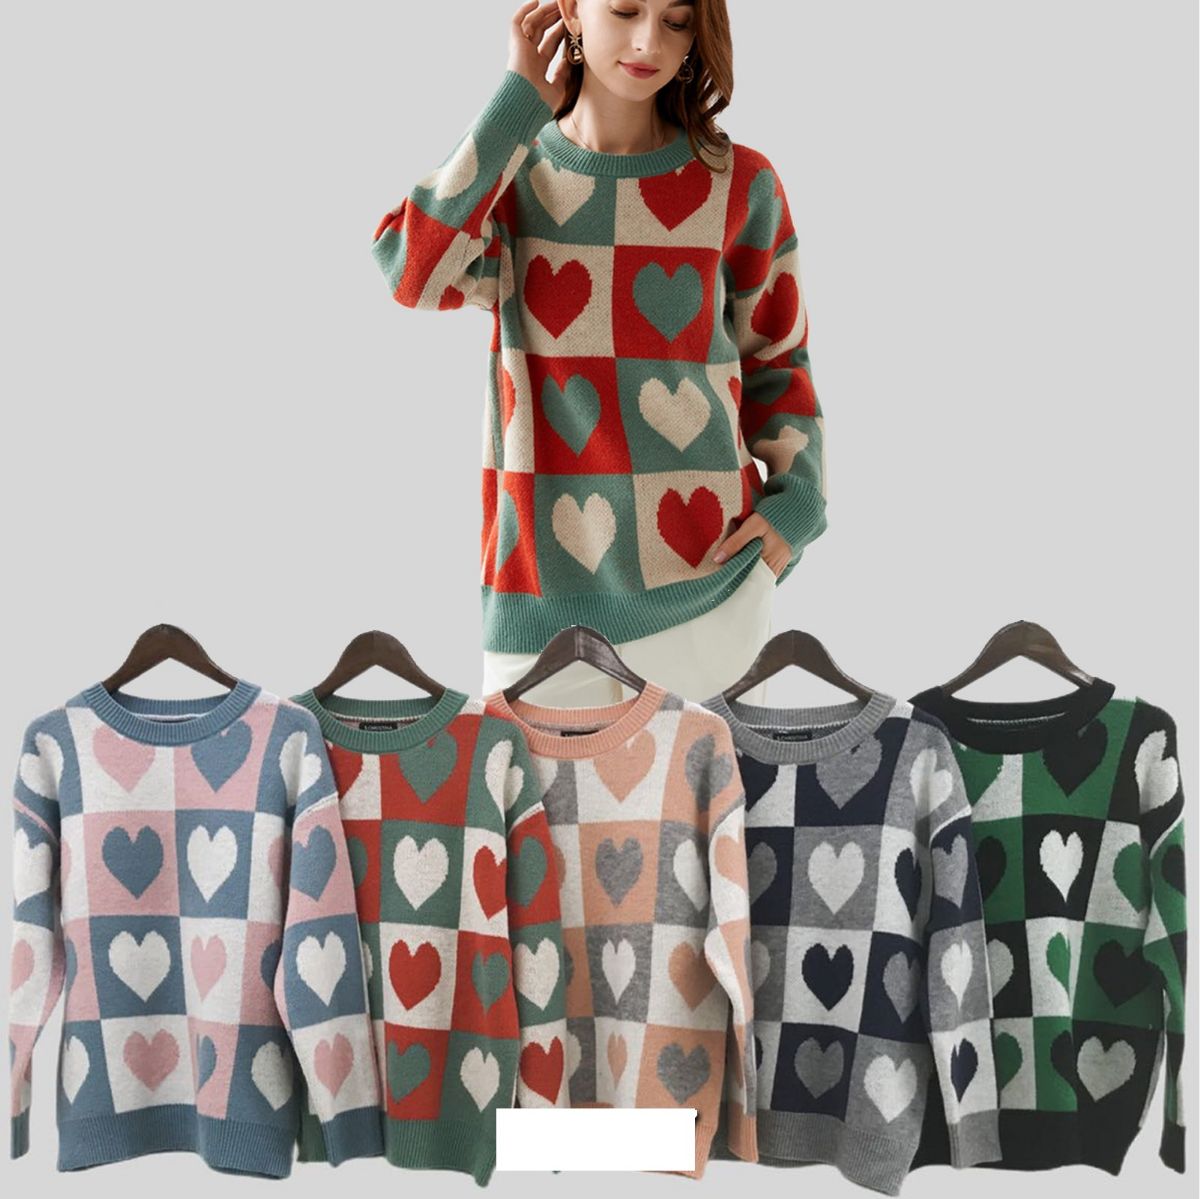 12 Pieces of Knitted Cashmere Baggy Sweater Checker Hearts Design L/xl